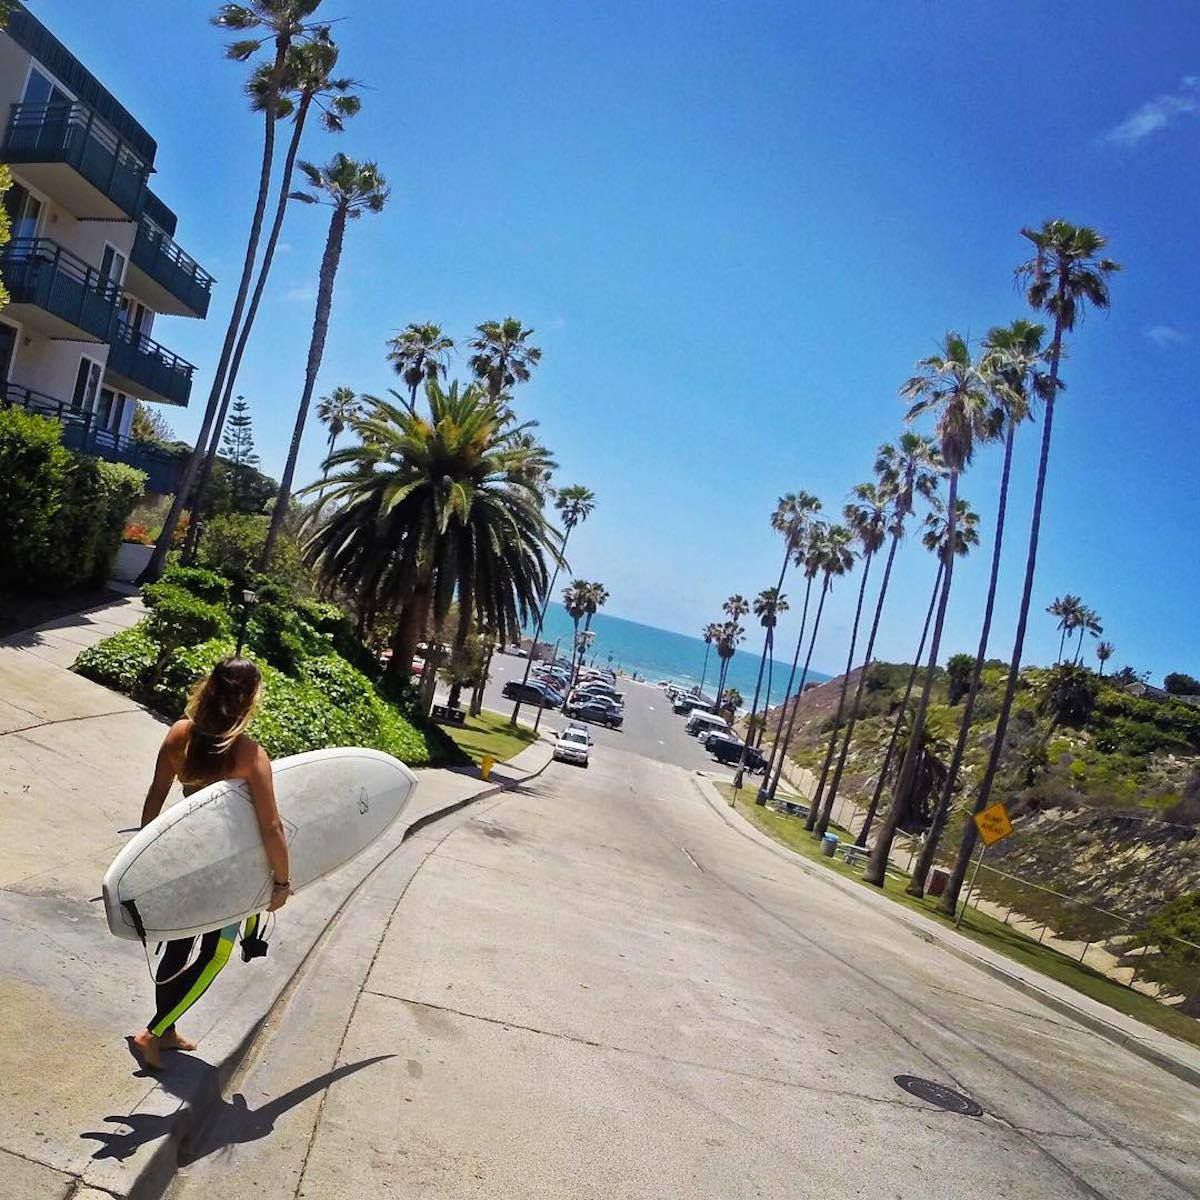 Surfer heading down to the beach in San Diego, California | Source: Pinterest